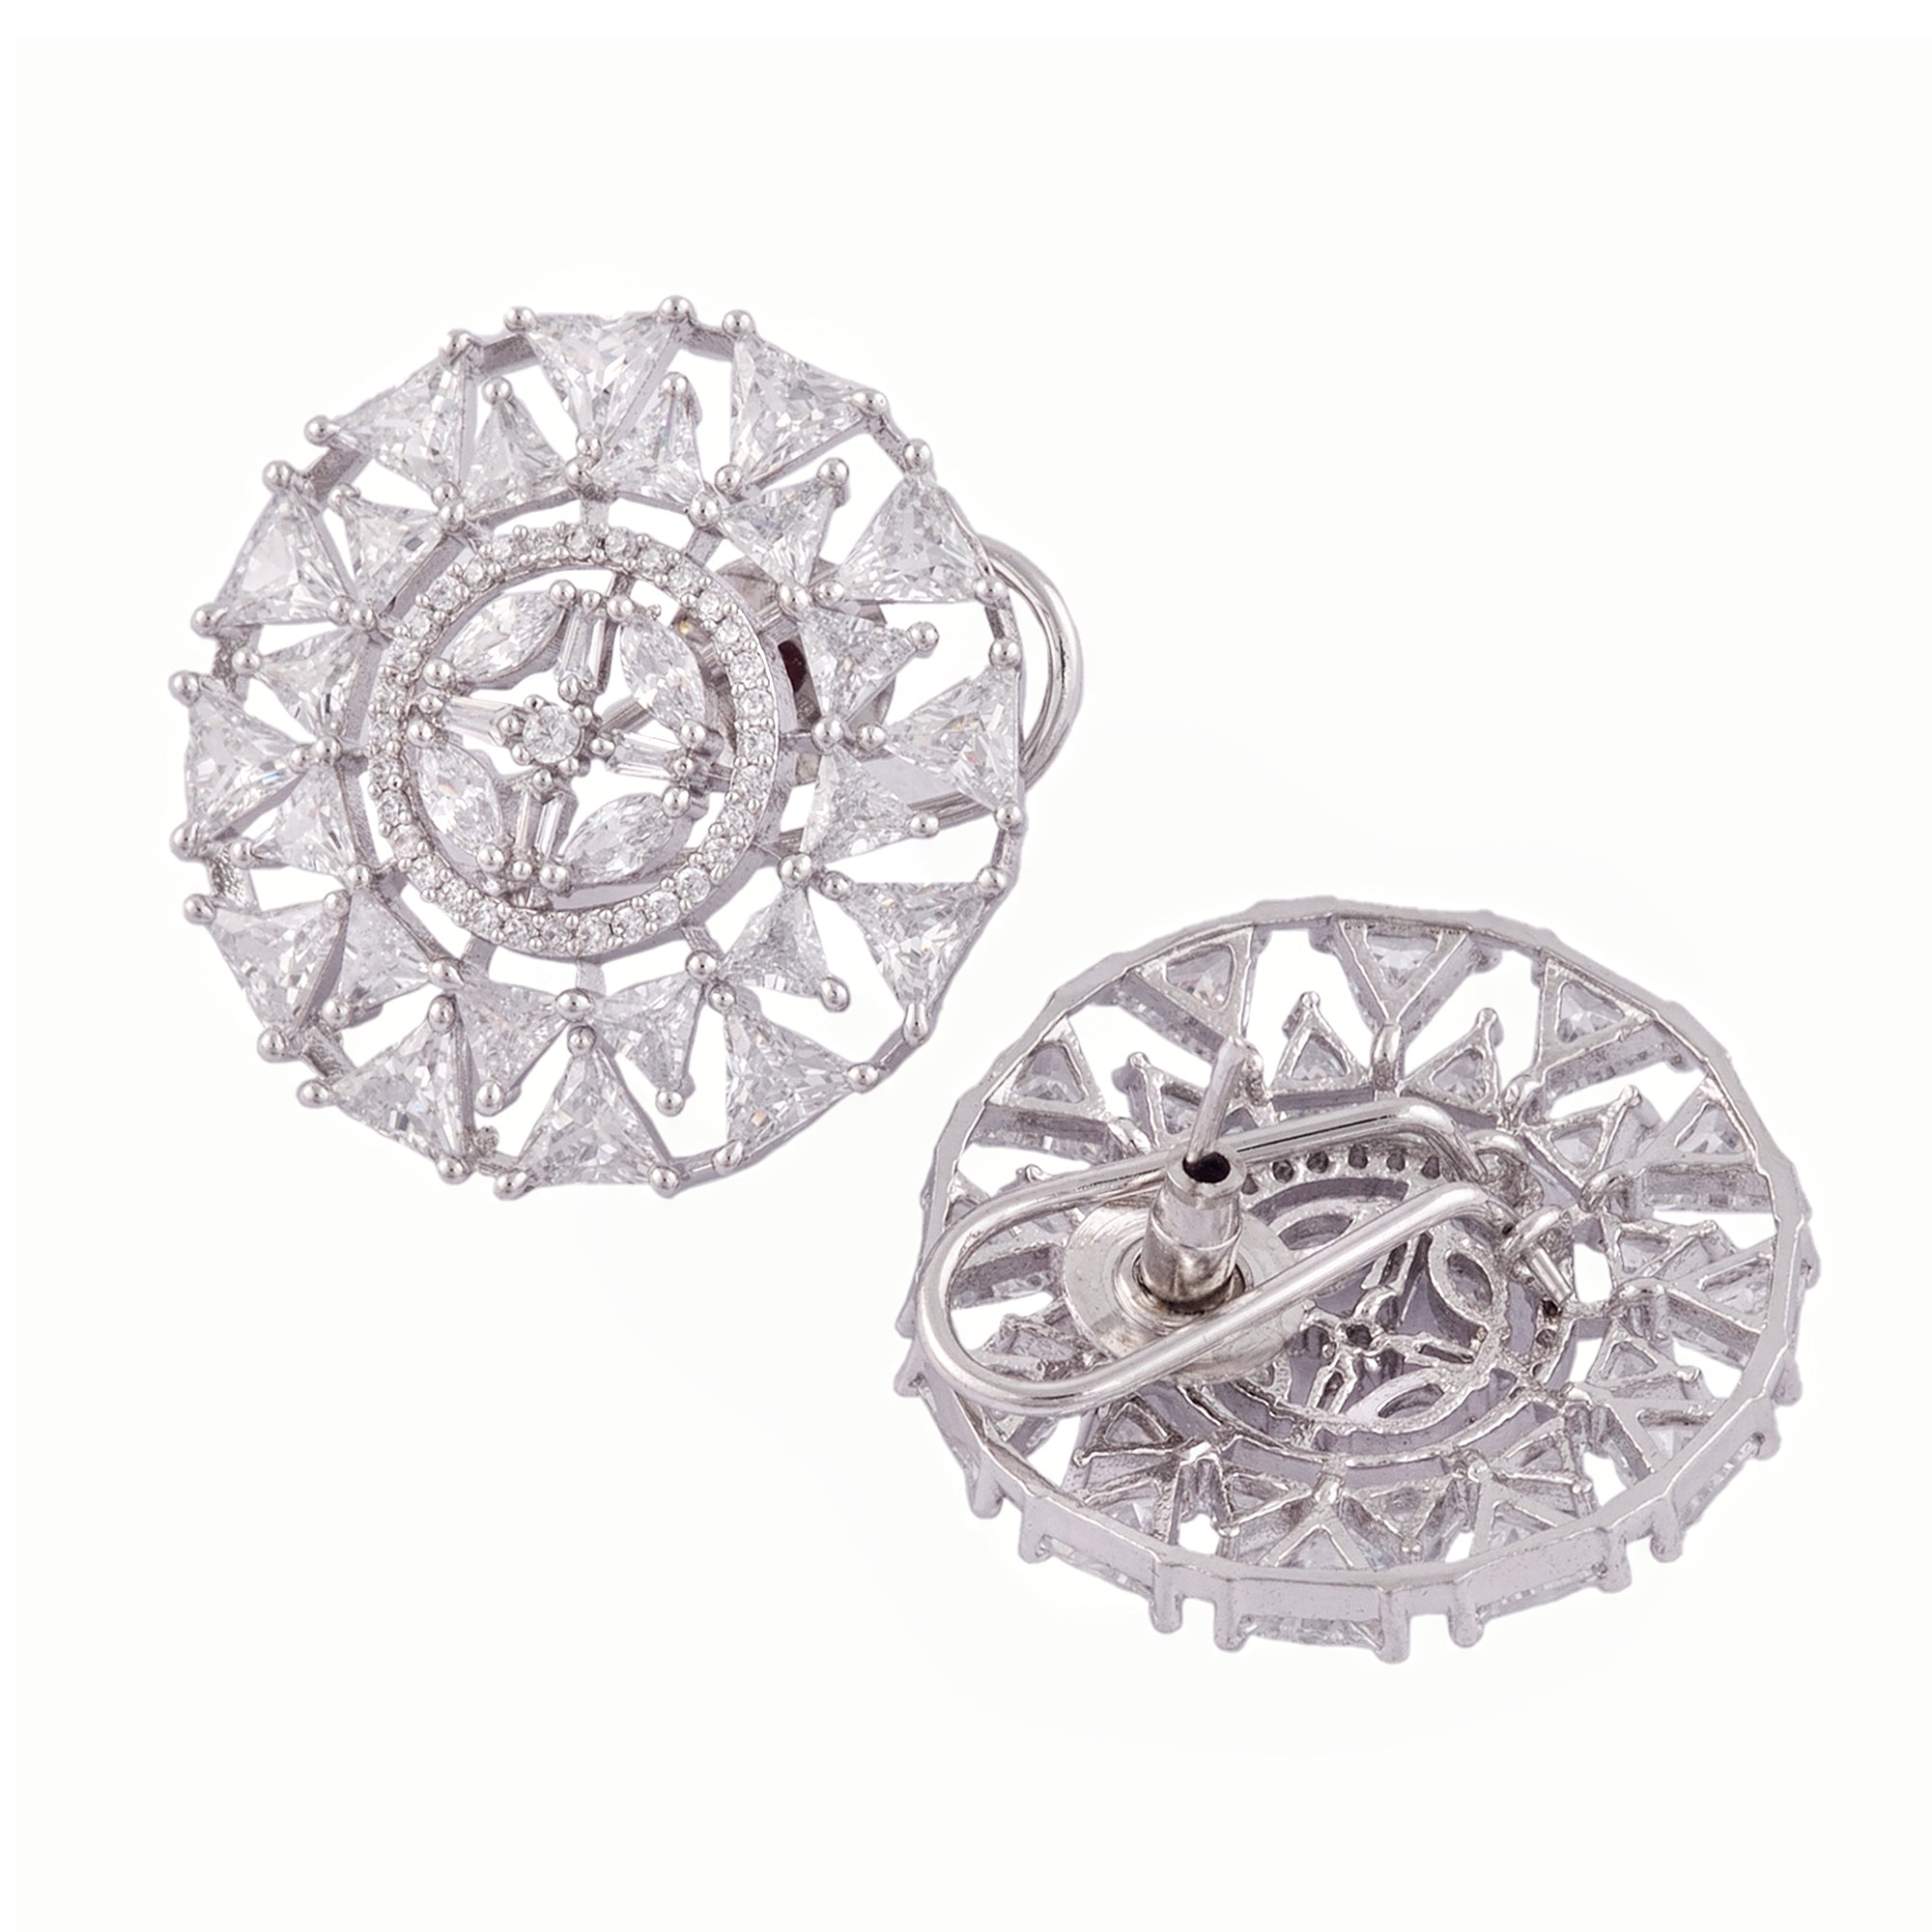 White Rhodium Plated American Diamond Studded Handcrafted Earrings for Women and Girls - Saraf RS Jewellery